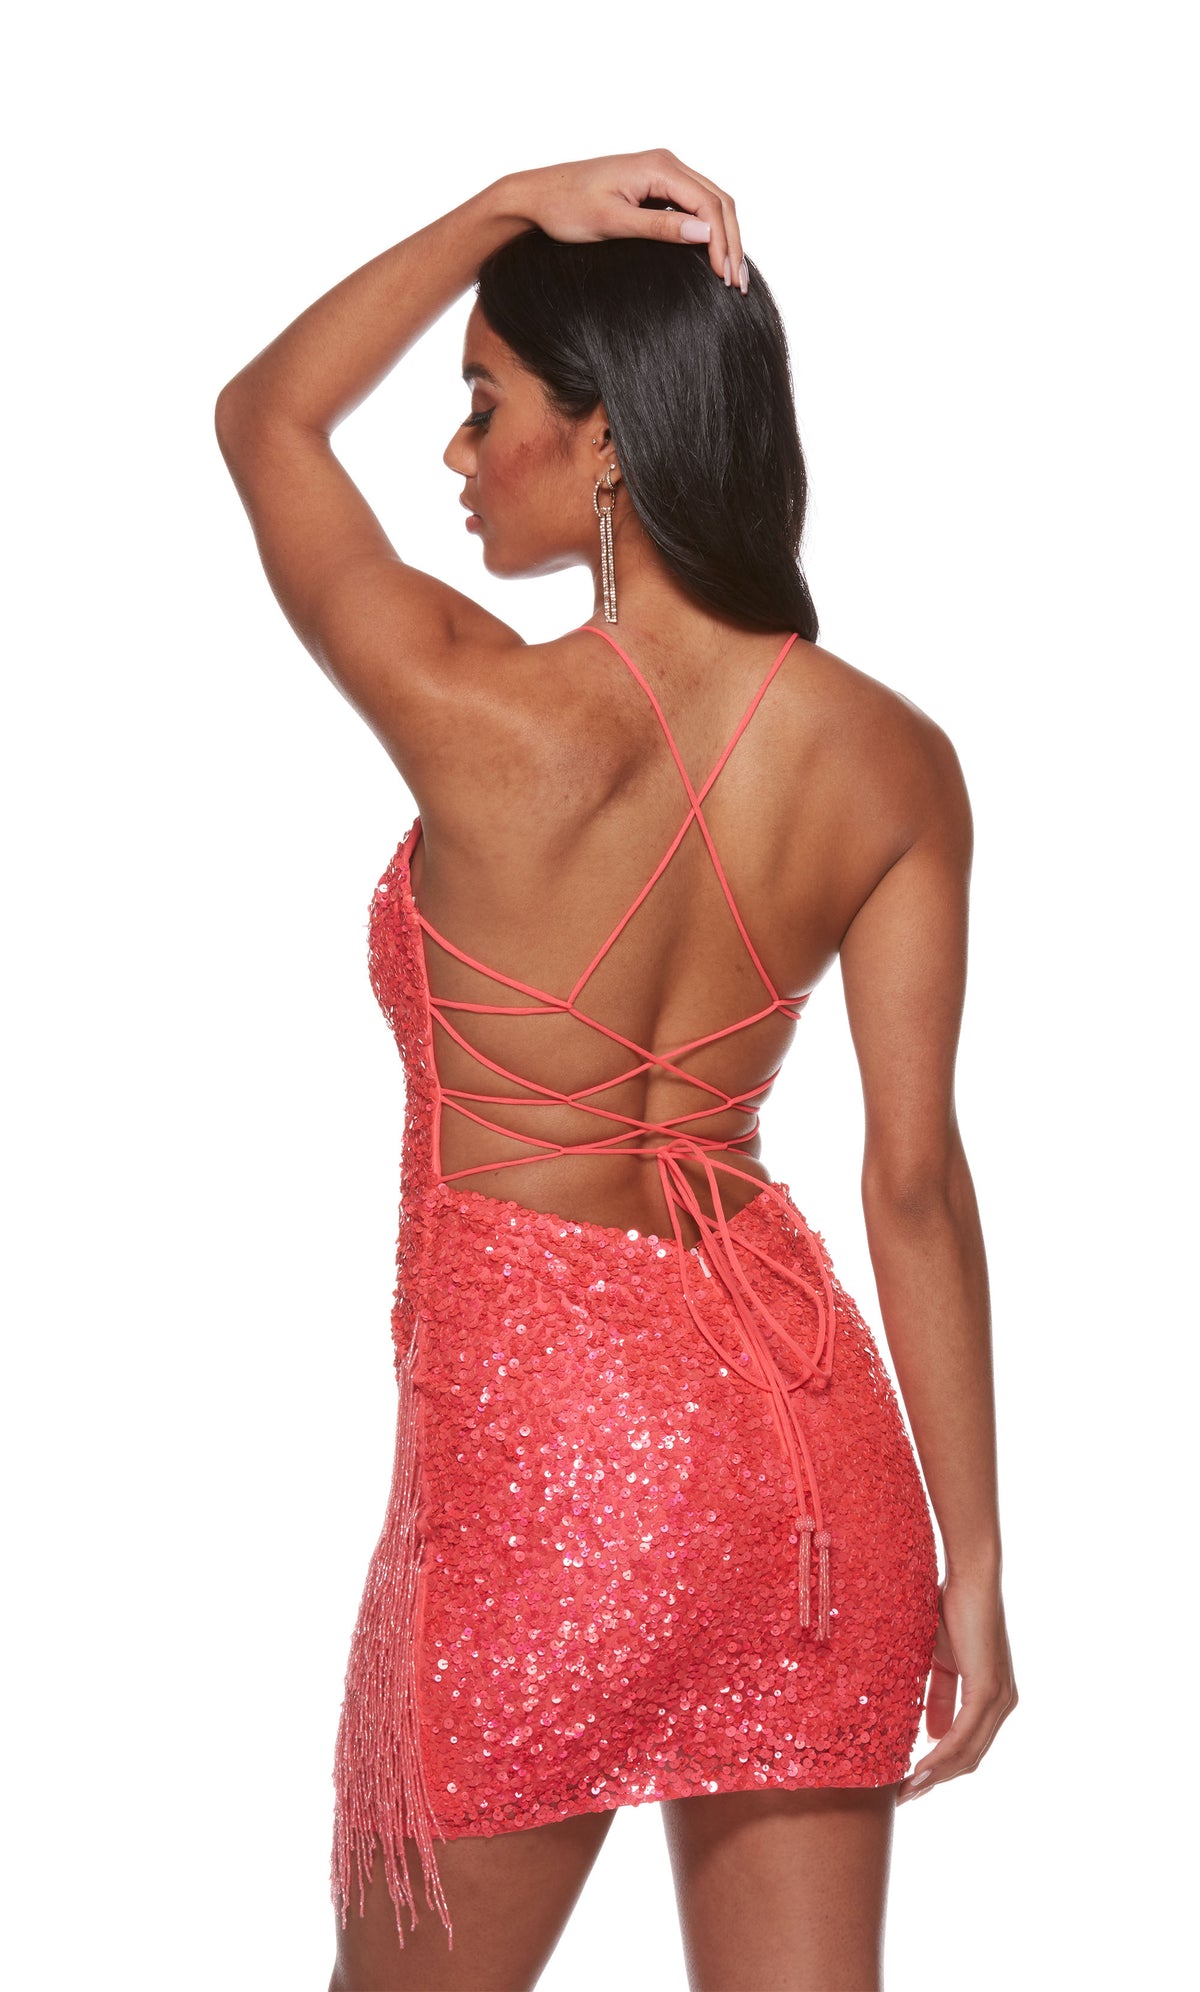 A glamorous short prom dress in iridescent hyper-pink sequins. The dress features a low neckline and beaded fringe, adding interest to the look.